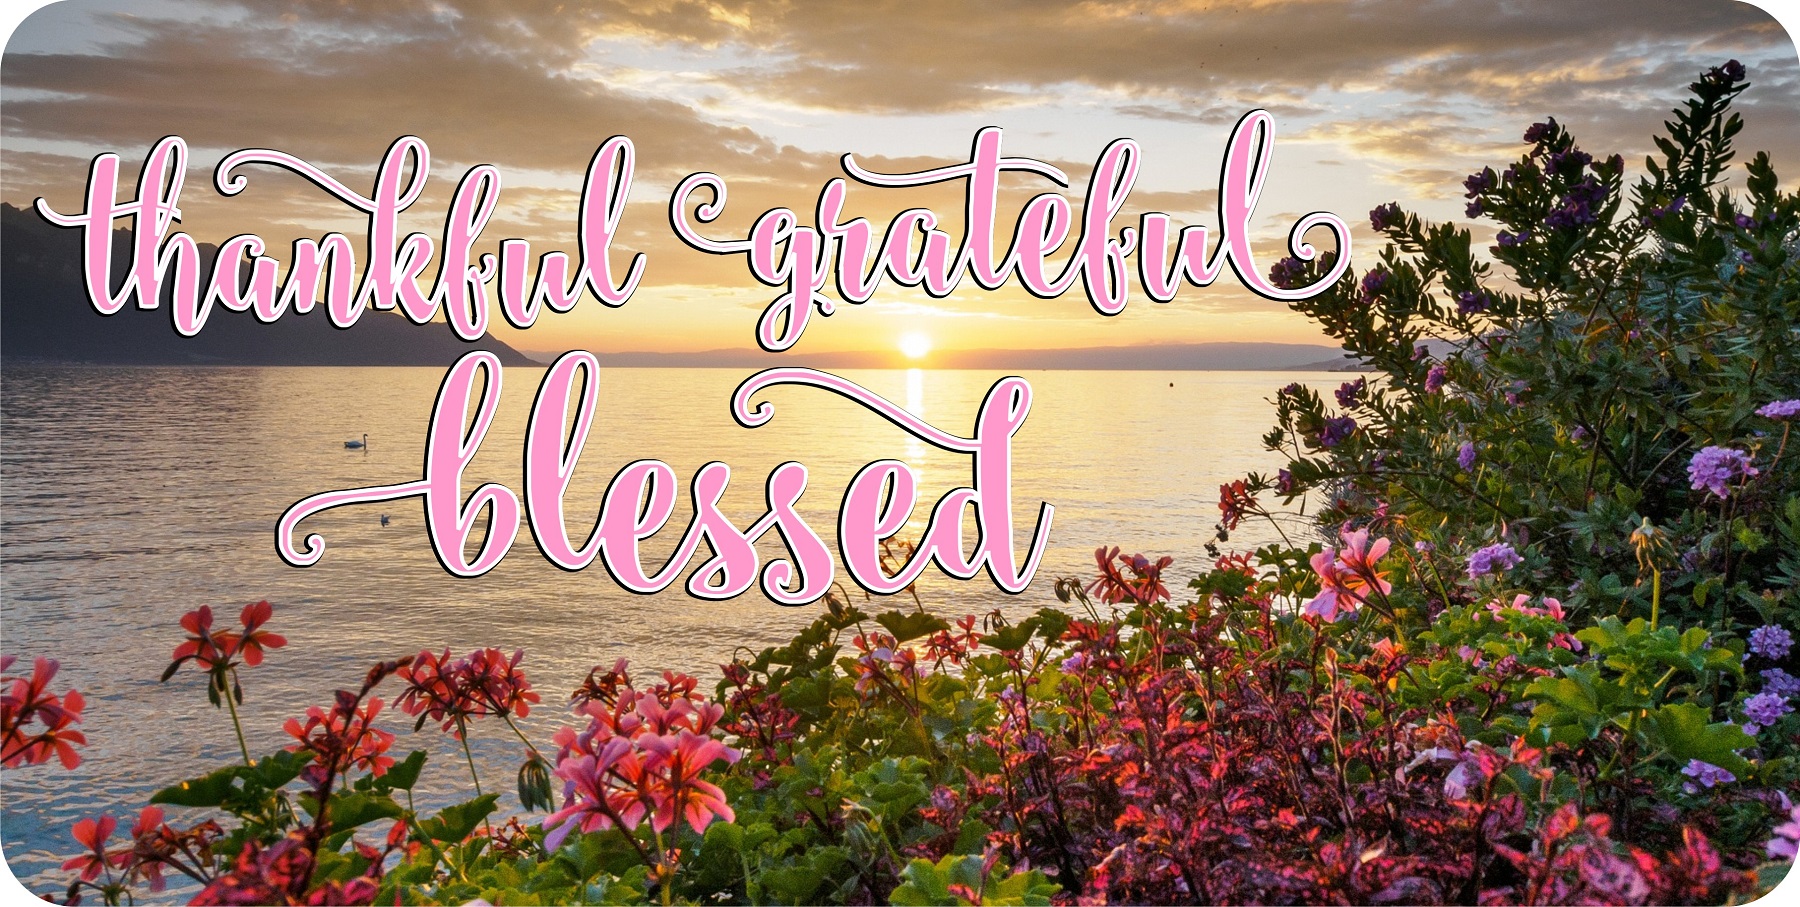 License Plates Online Thankful Grateful Blessed Pink Letters Photo License Plate